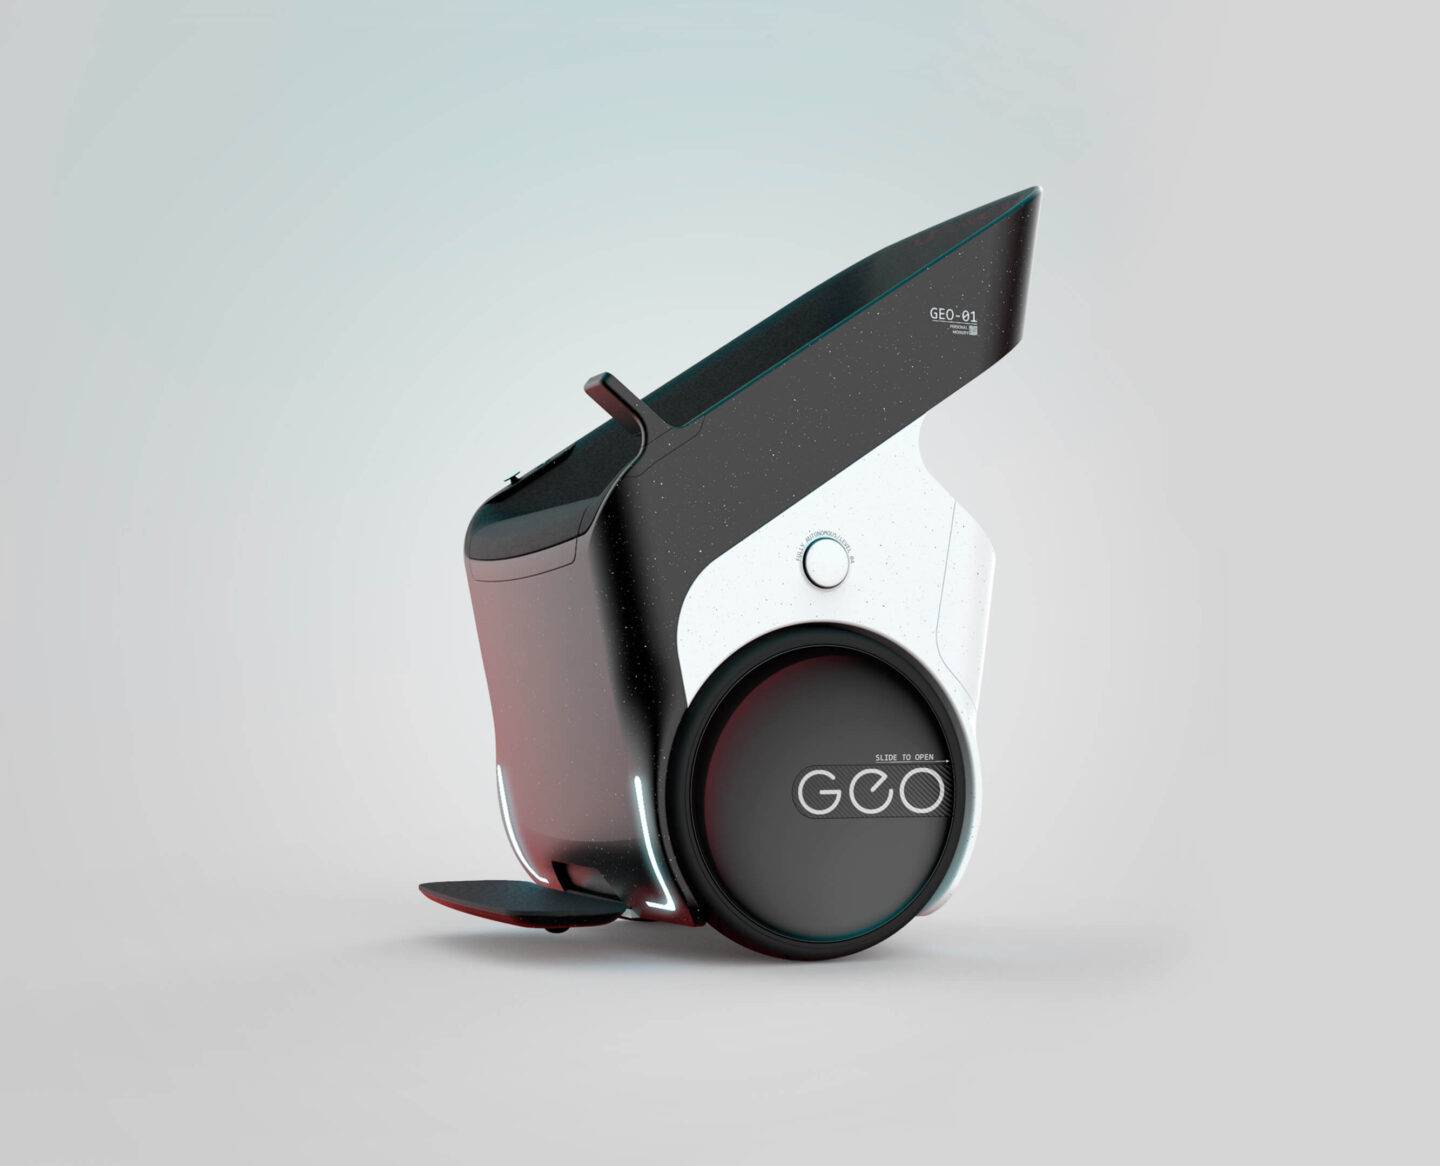 The GEO airport mobility buggy with onboard digital assistant